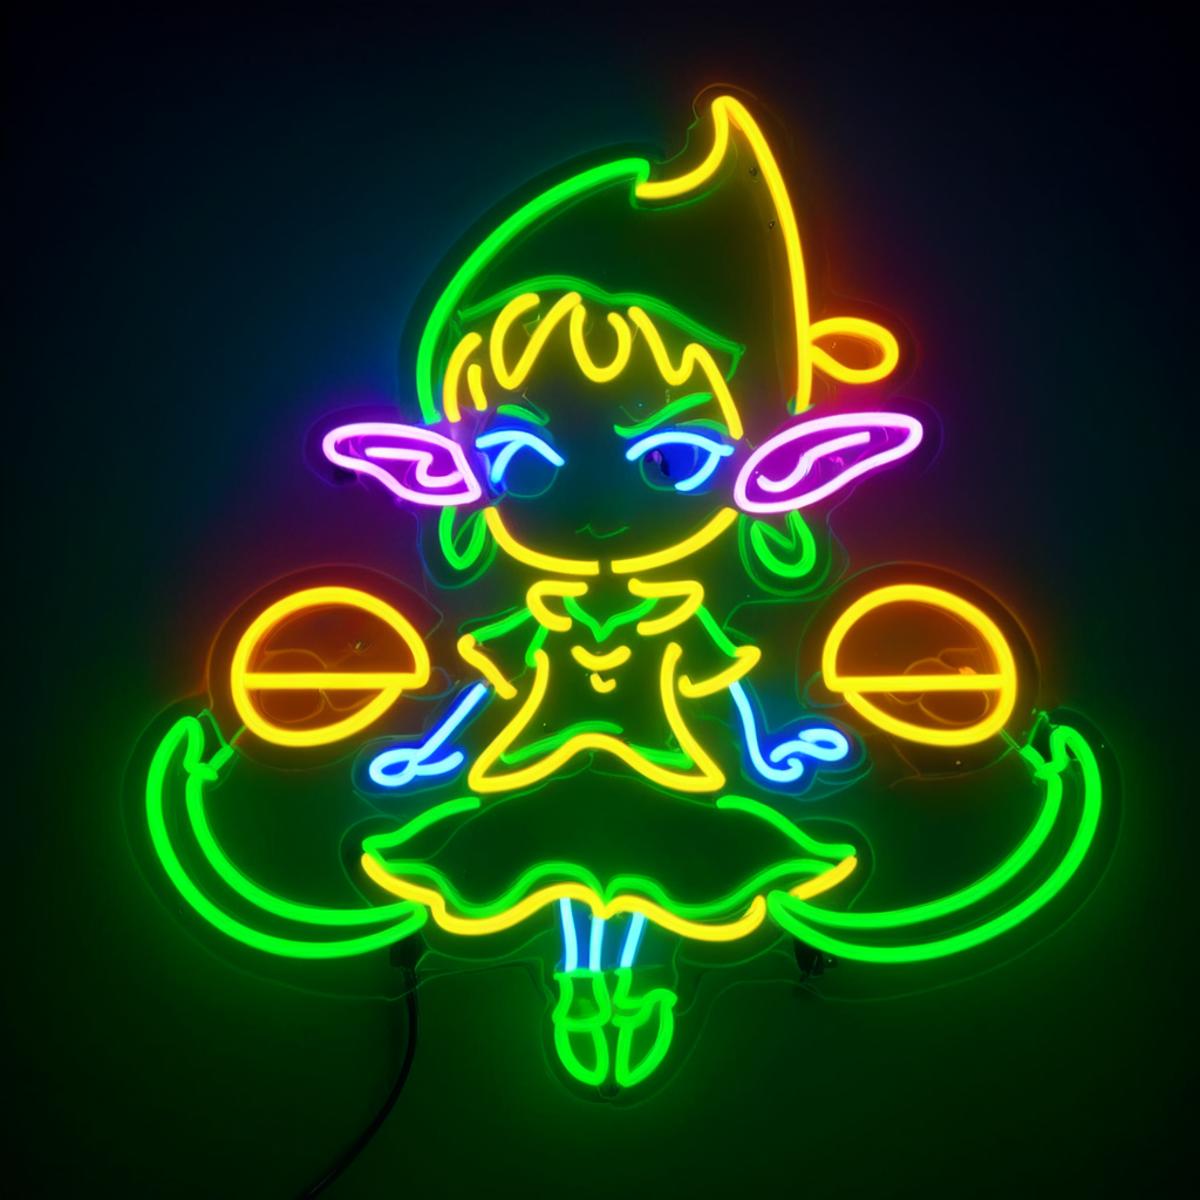 Neon sign image by Liquidn2